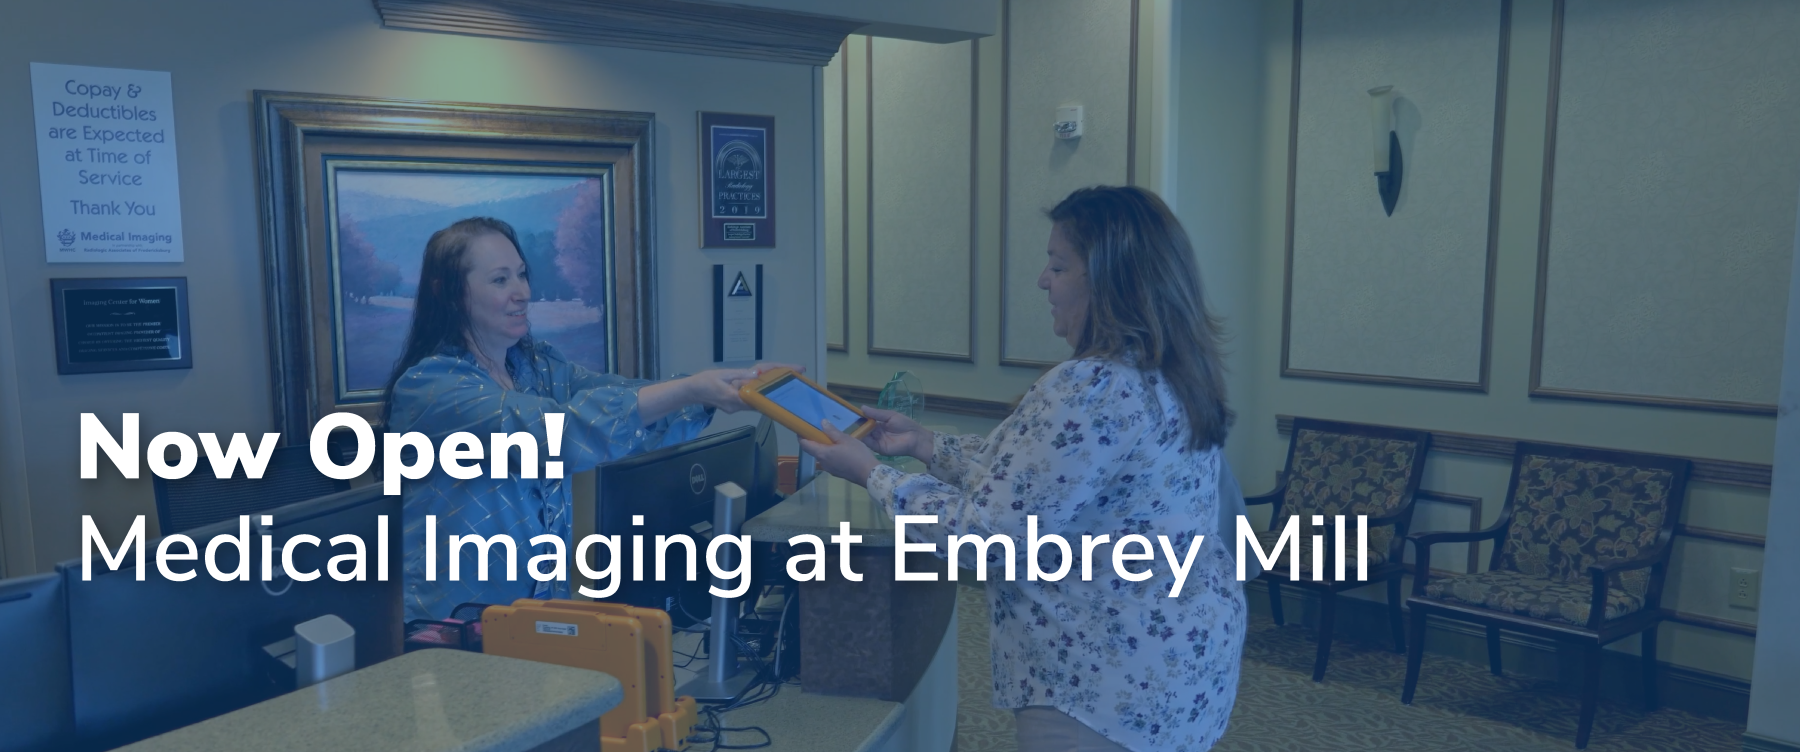 Now Open! Medical Imaging at Embrey Mill